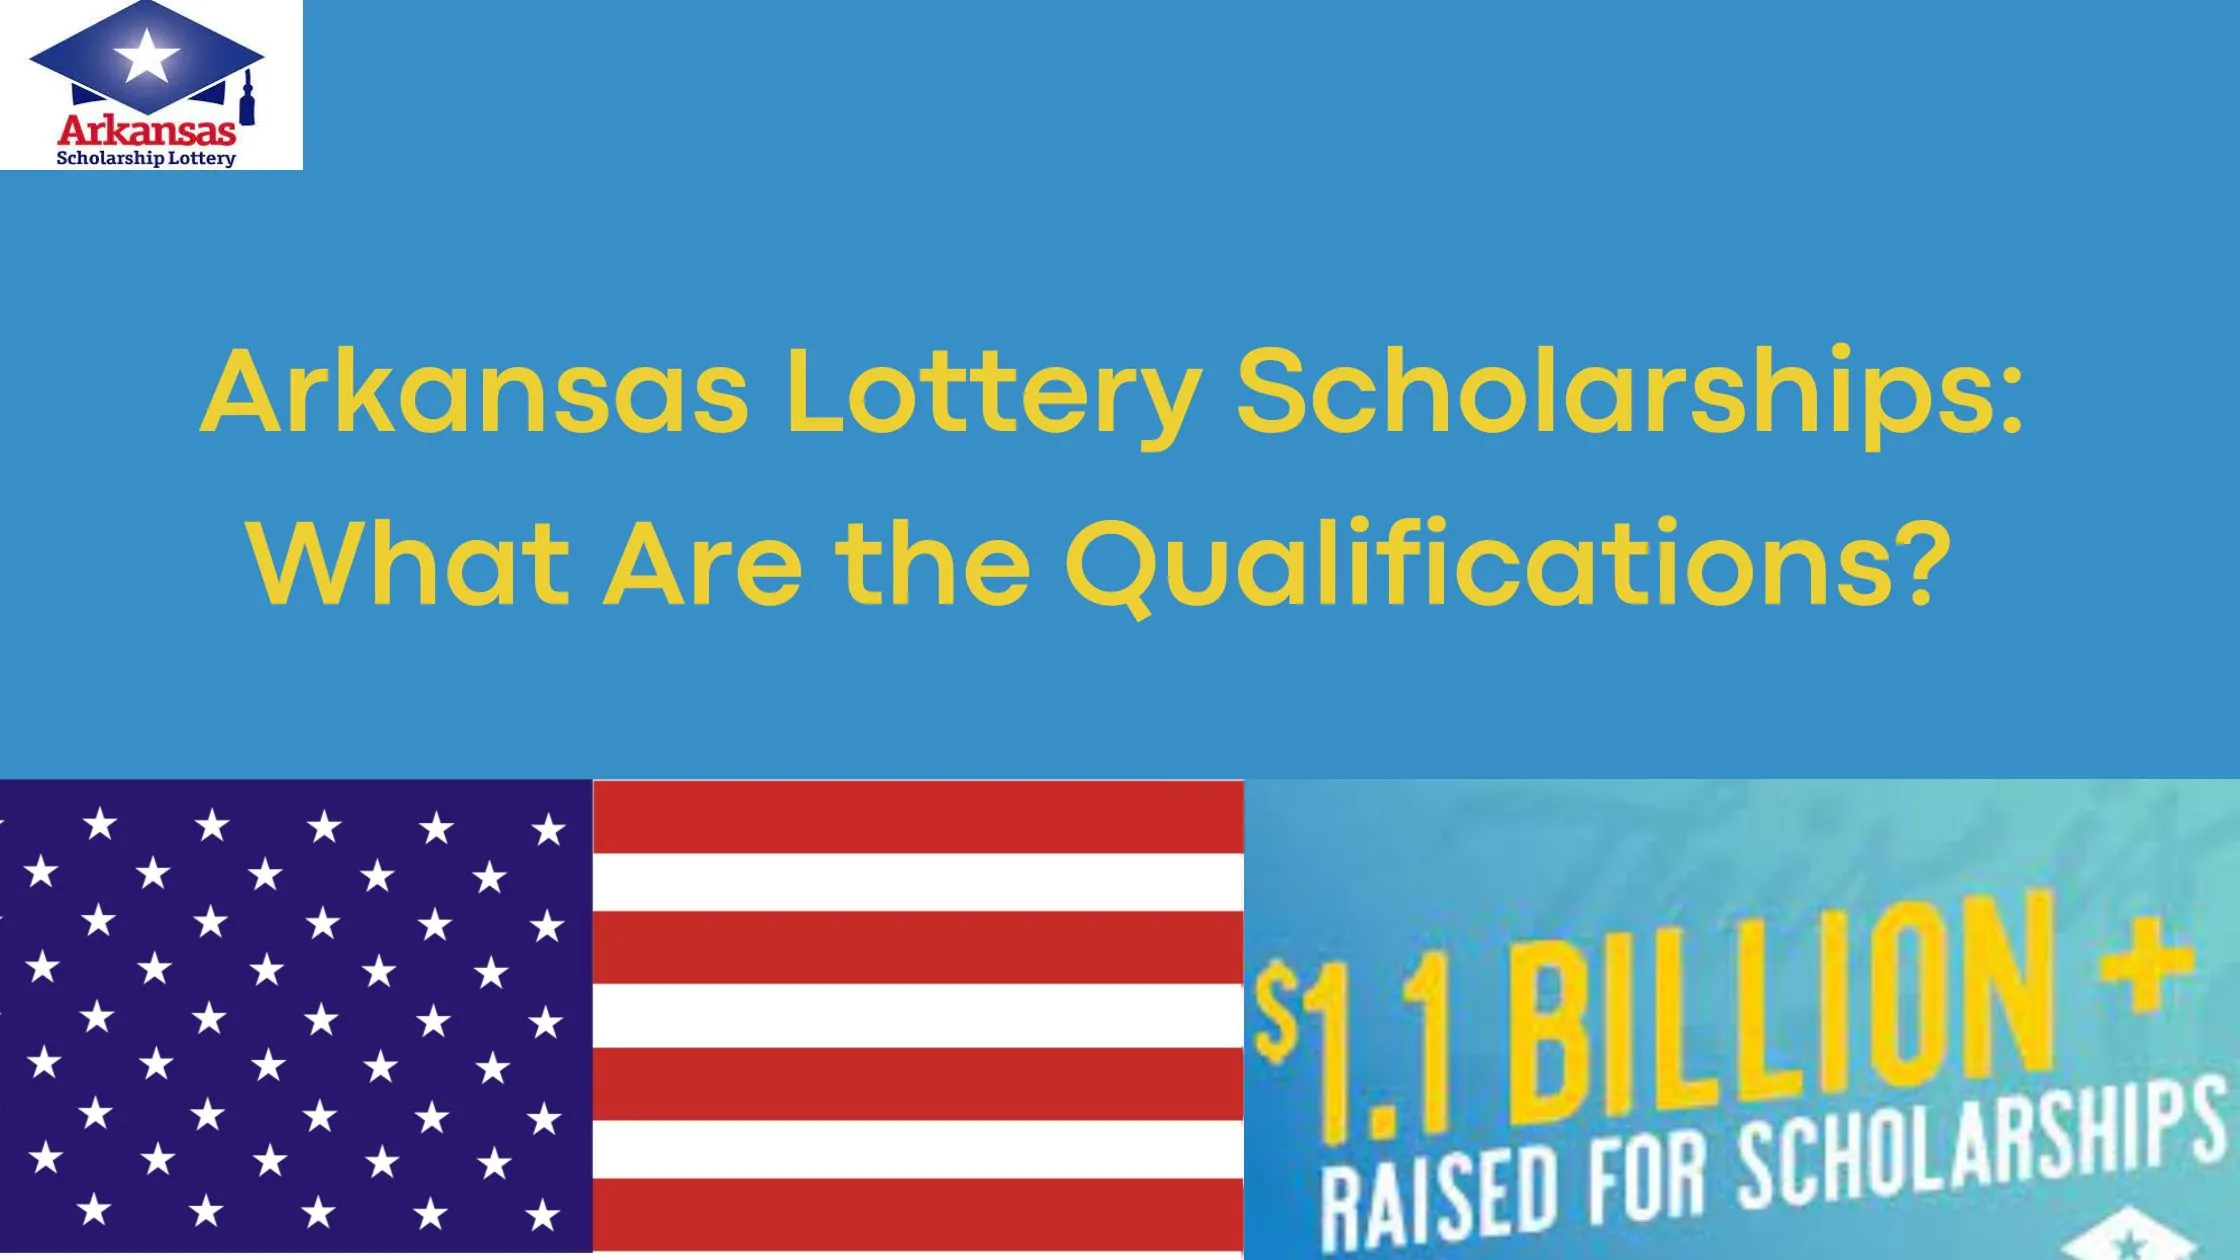 Arkansas Lottery Scholarships: What Are the Qualifications?